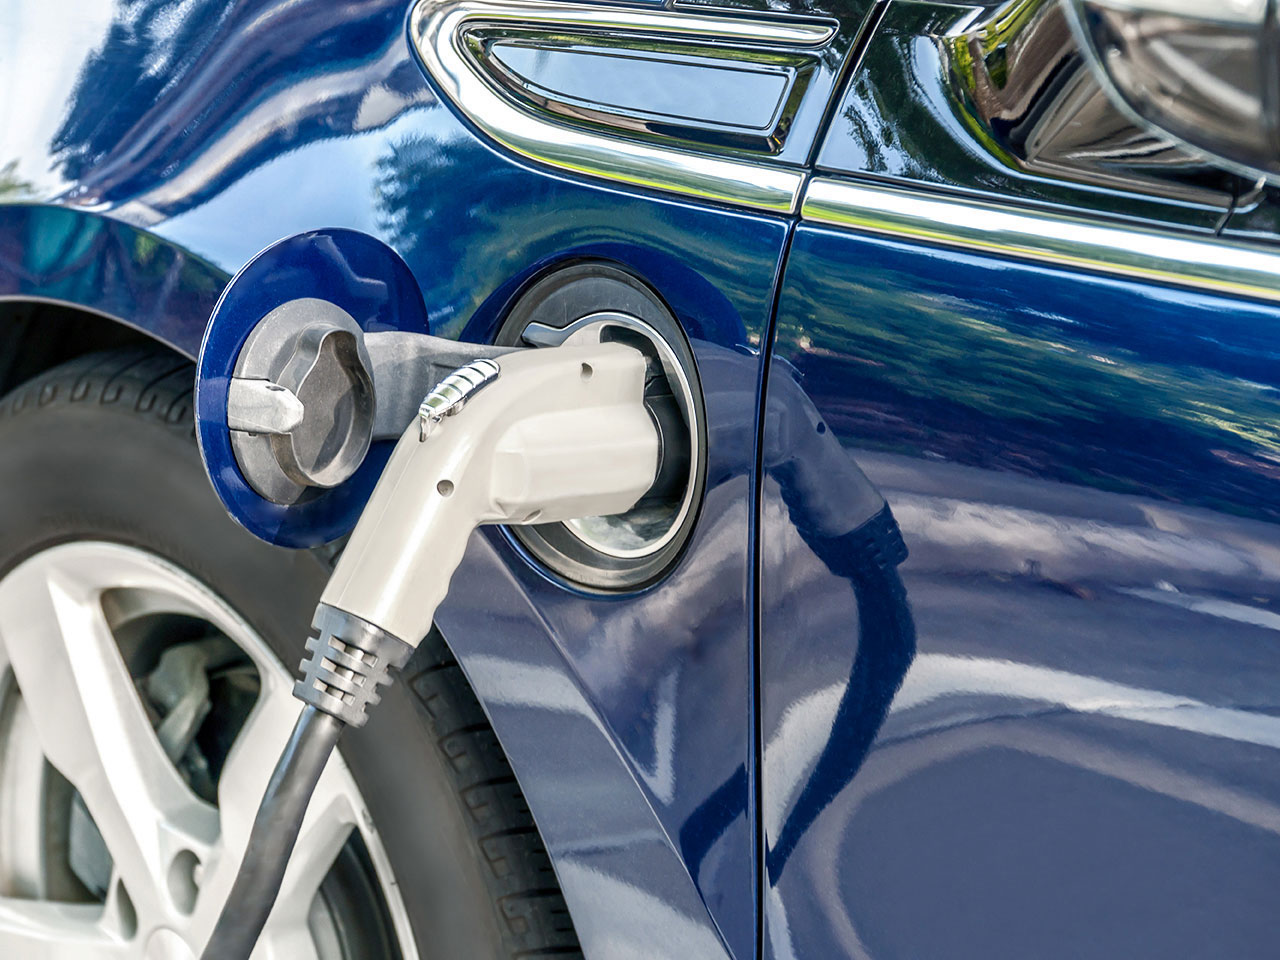 With more electric cars and hybrids on the road, more charging station are popping up to energize them all.